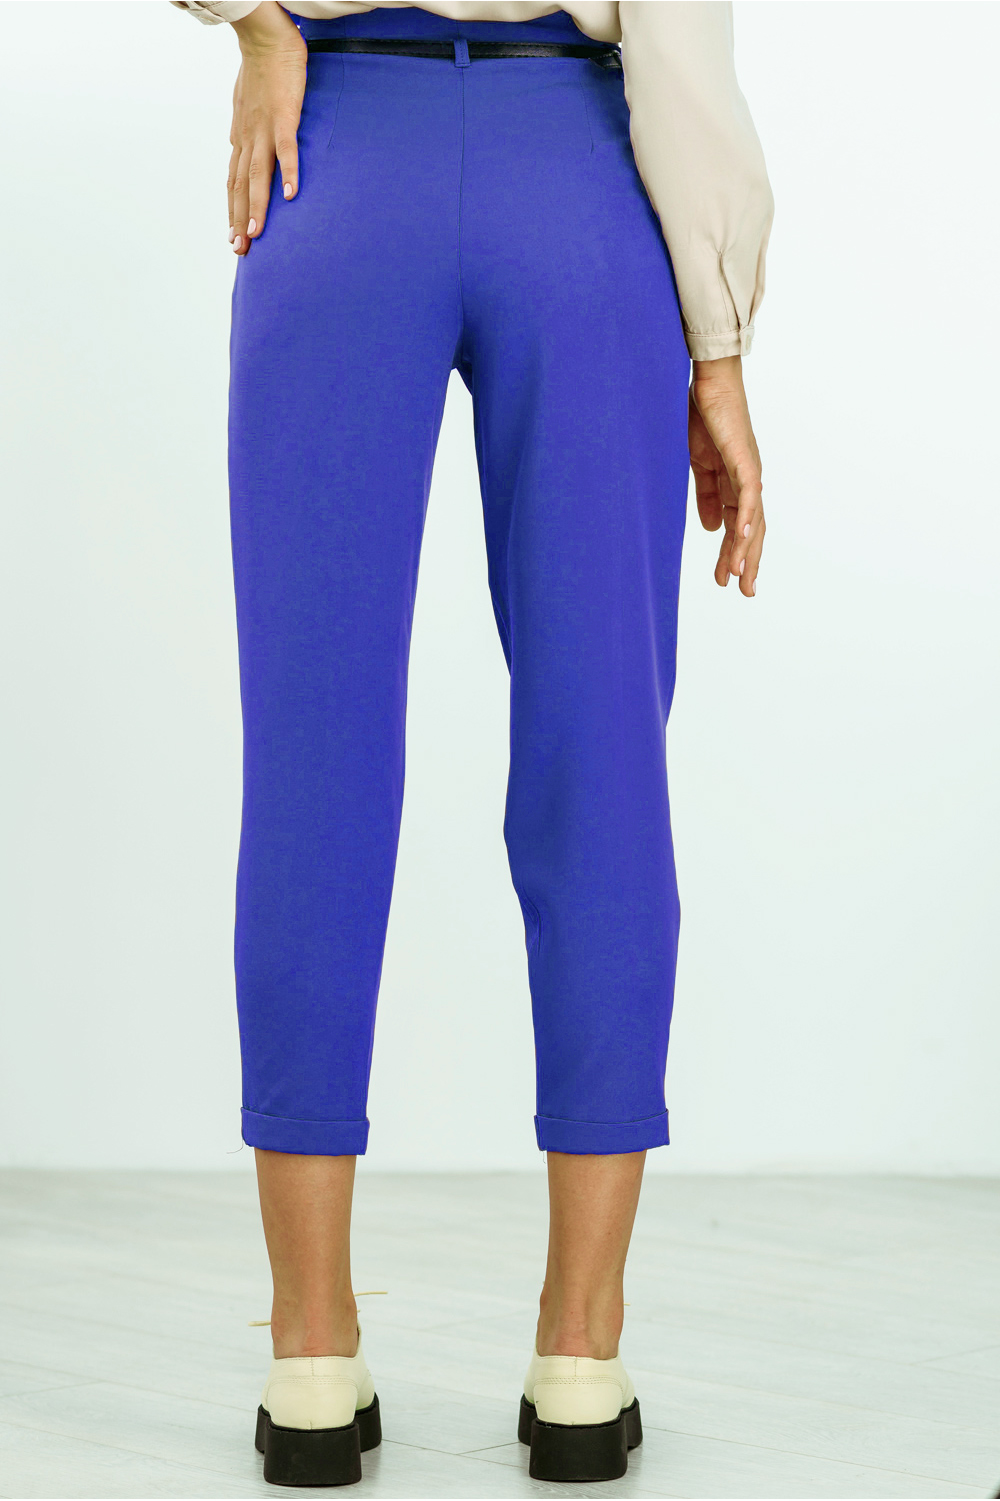 High waist trousers with belt